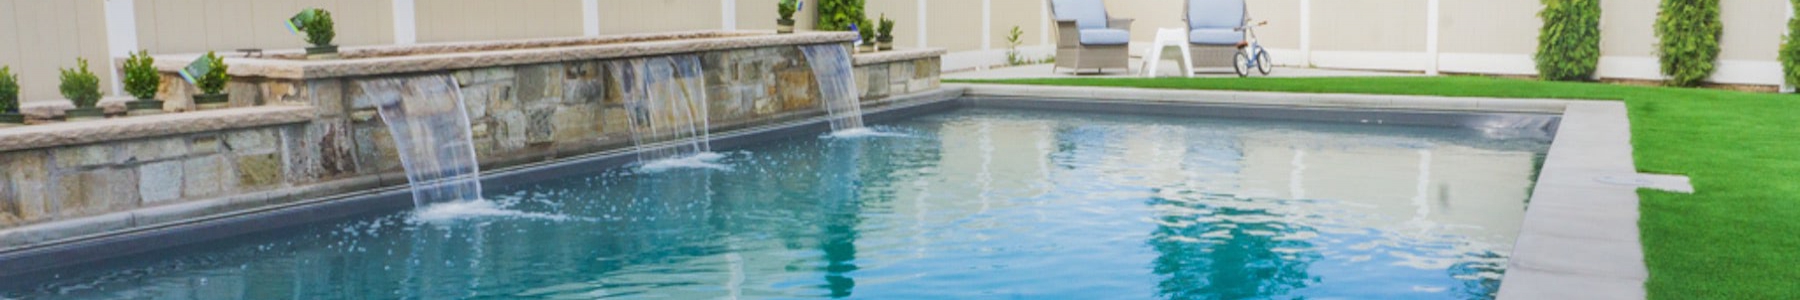 Pool Cleaning Maintenance